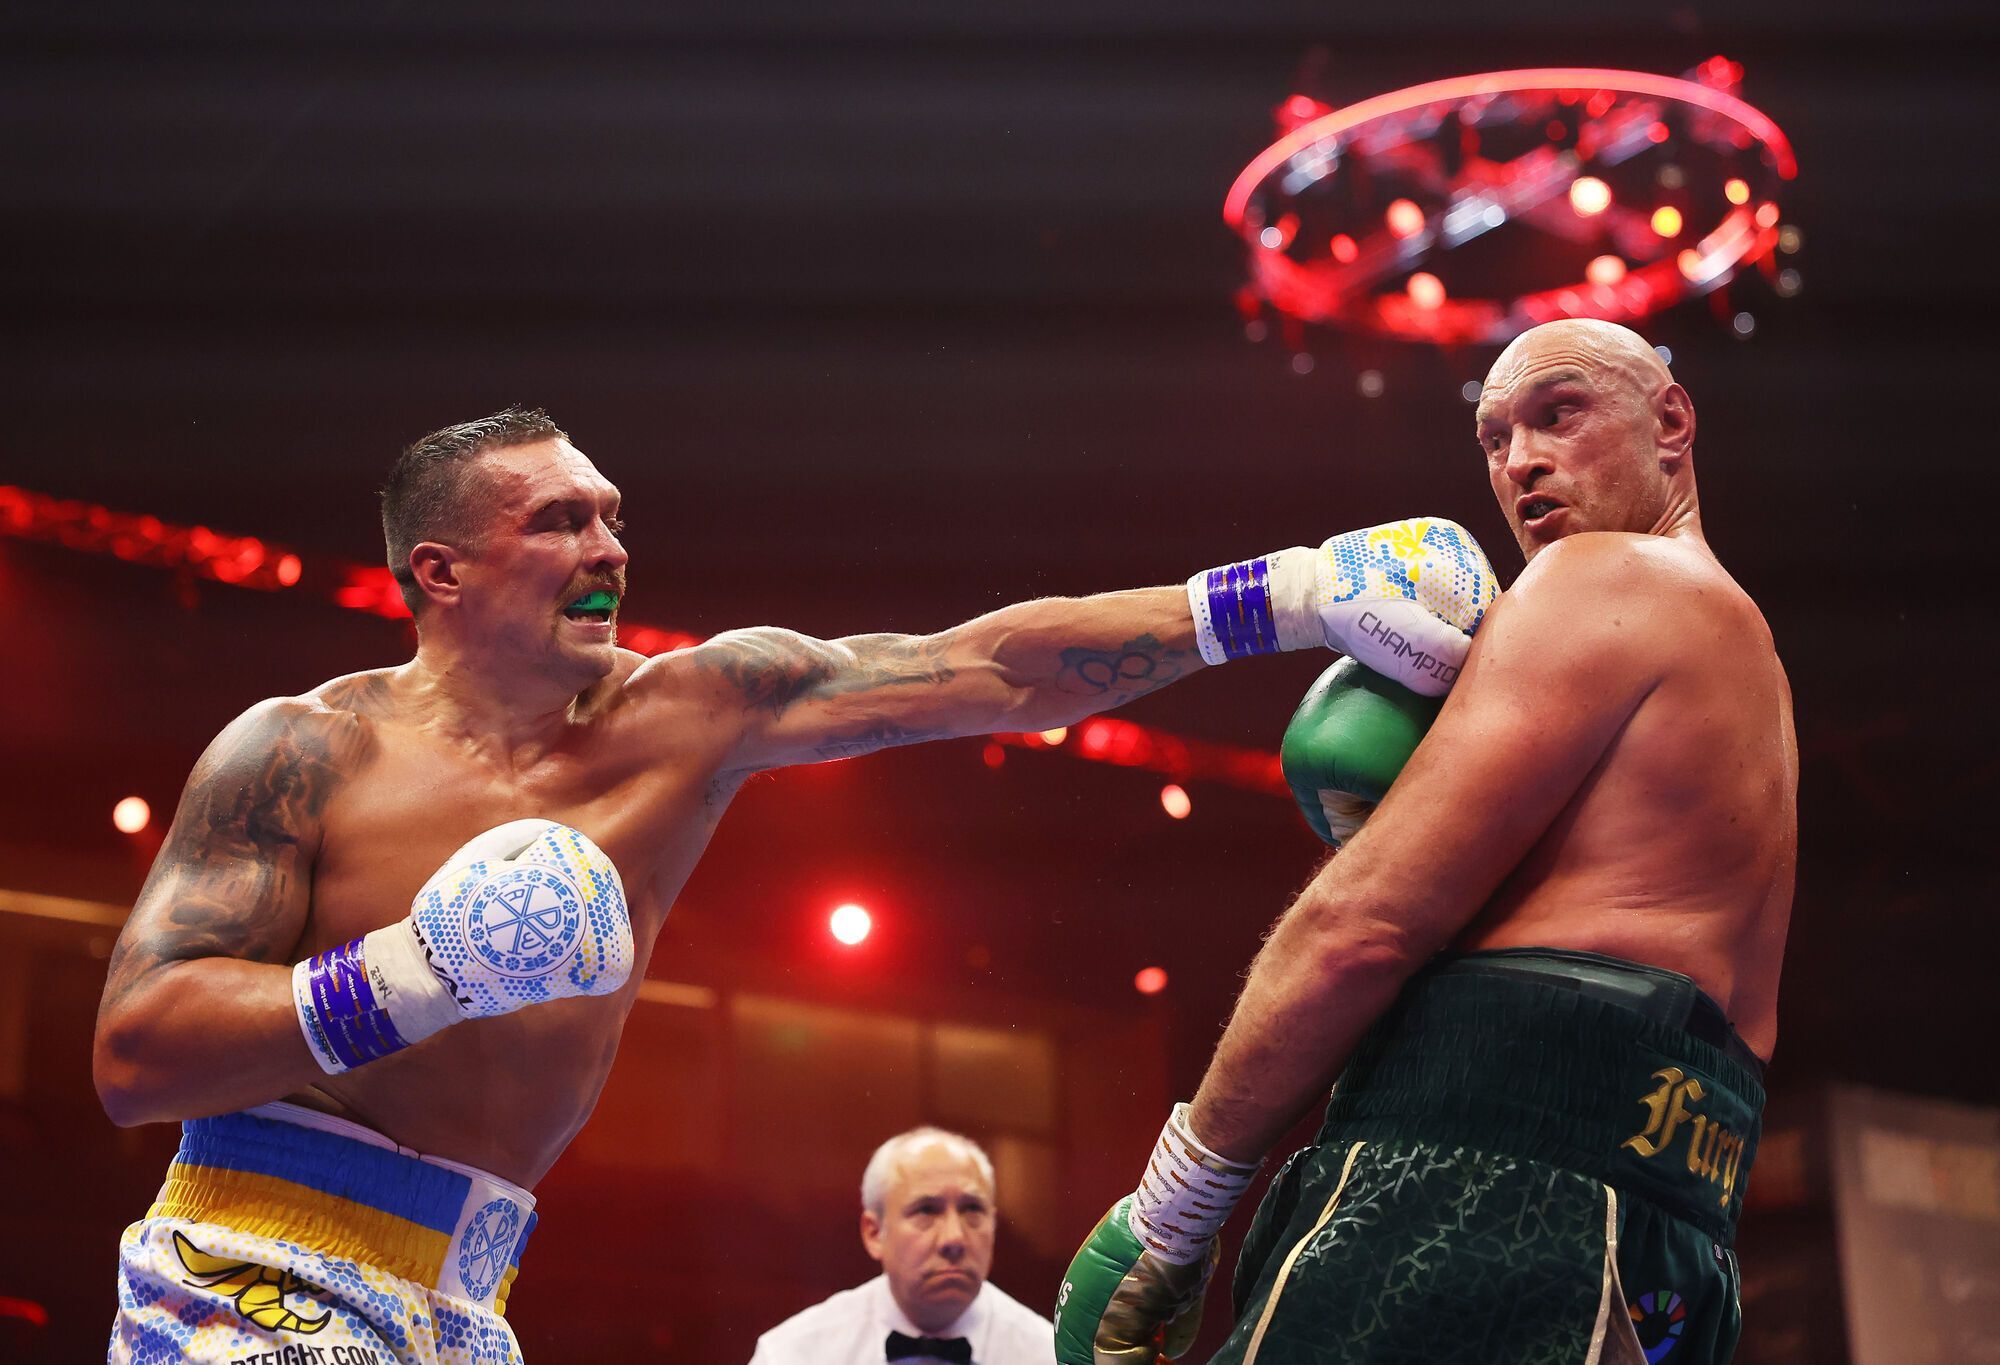 Usyk's action after the fight with Fury shocked Vacca. Video